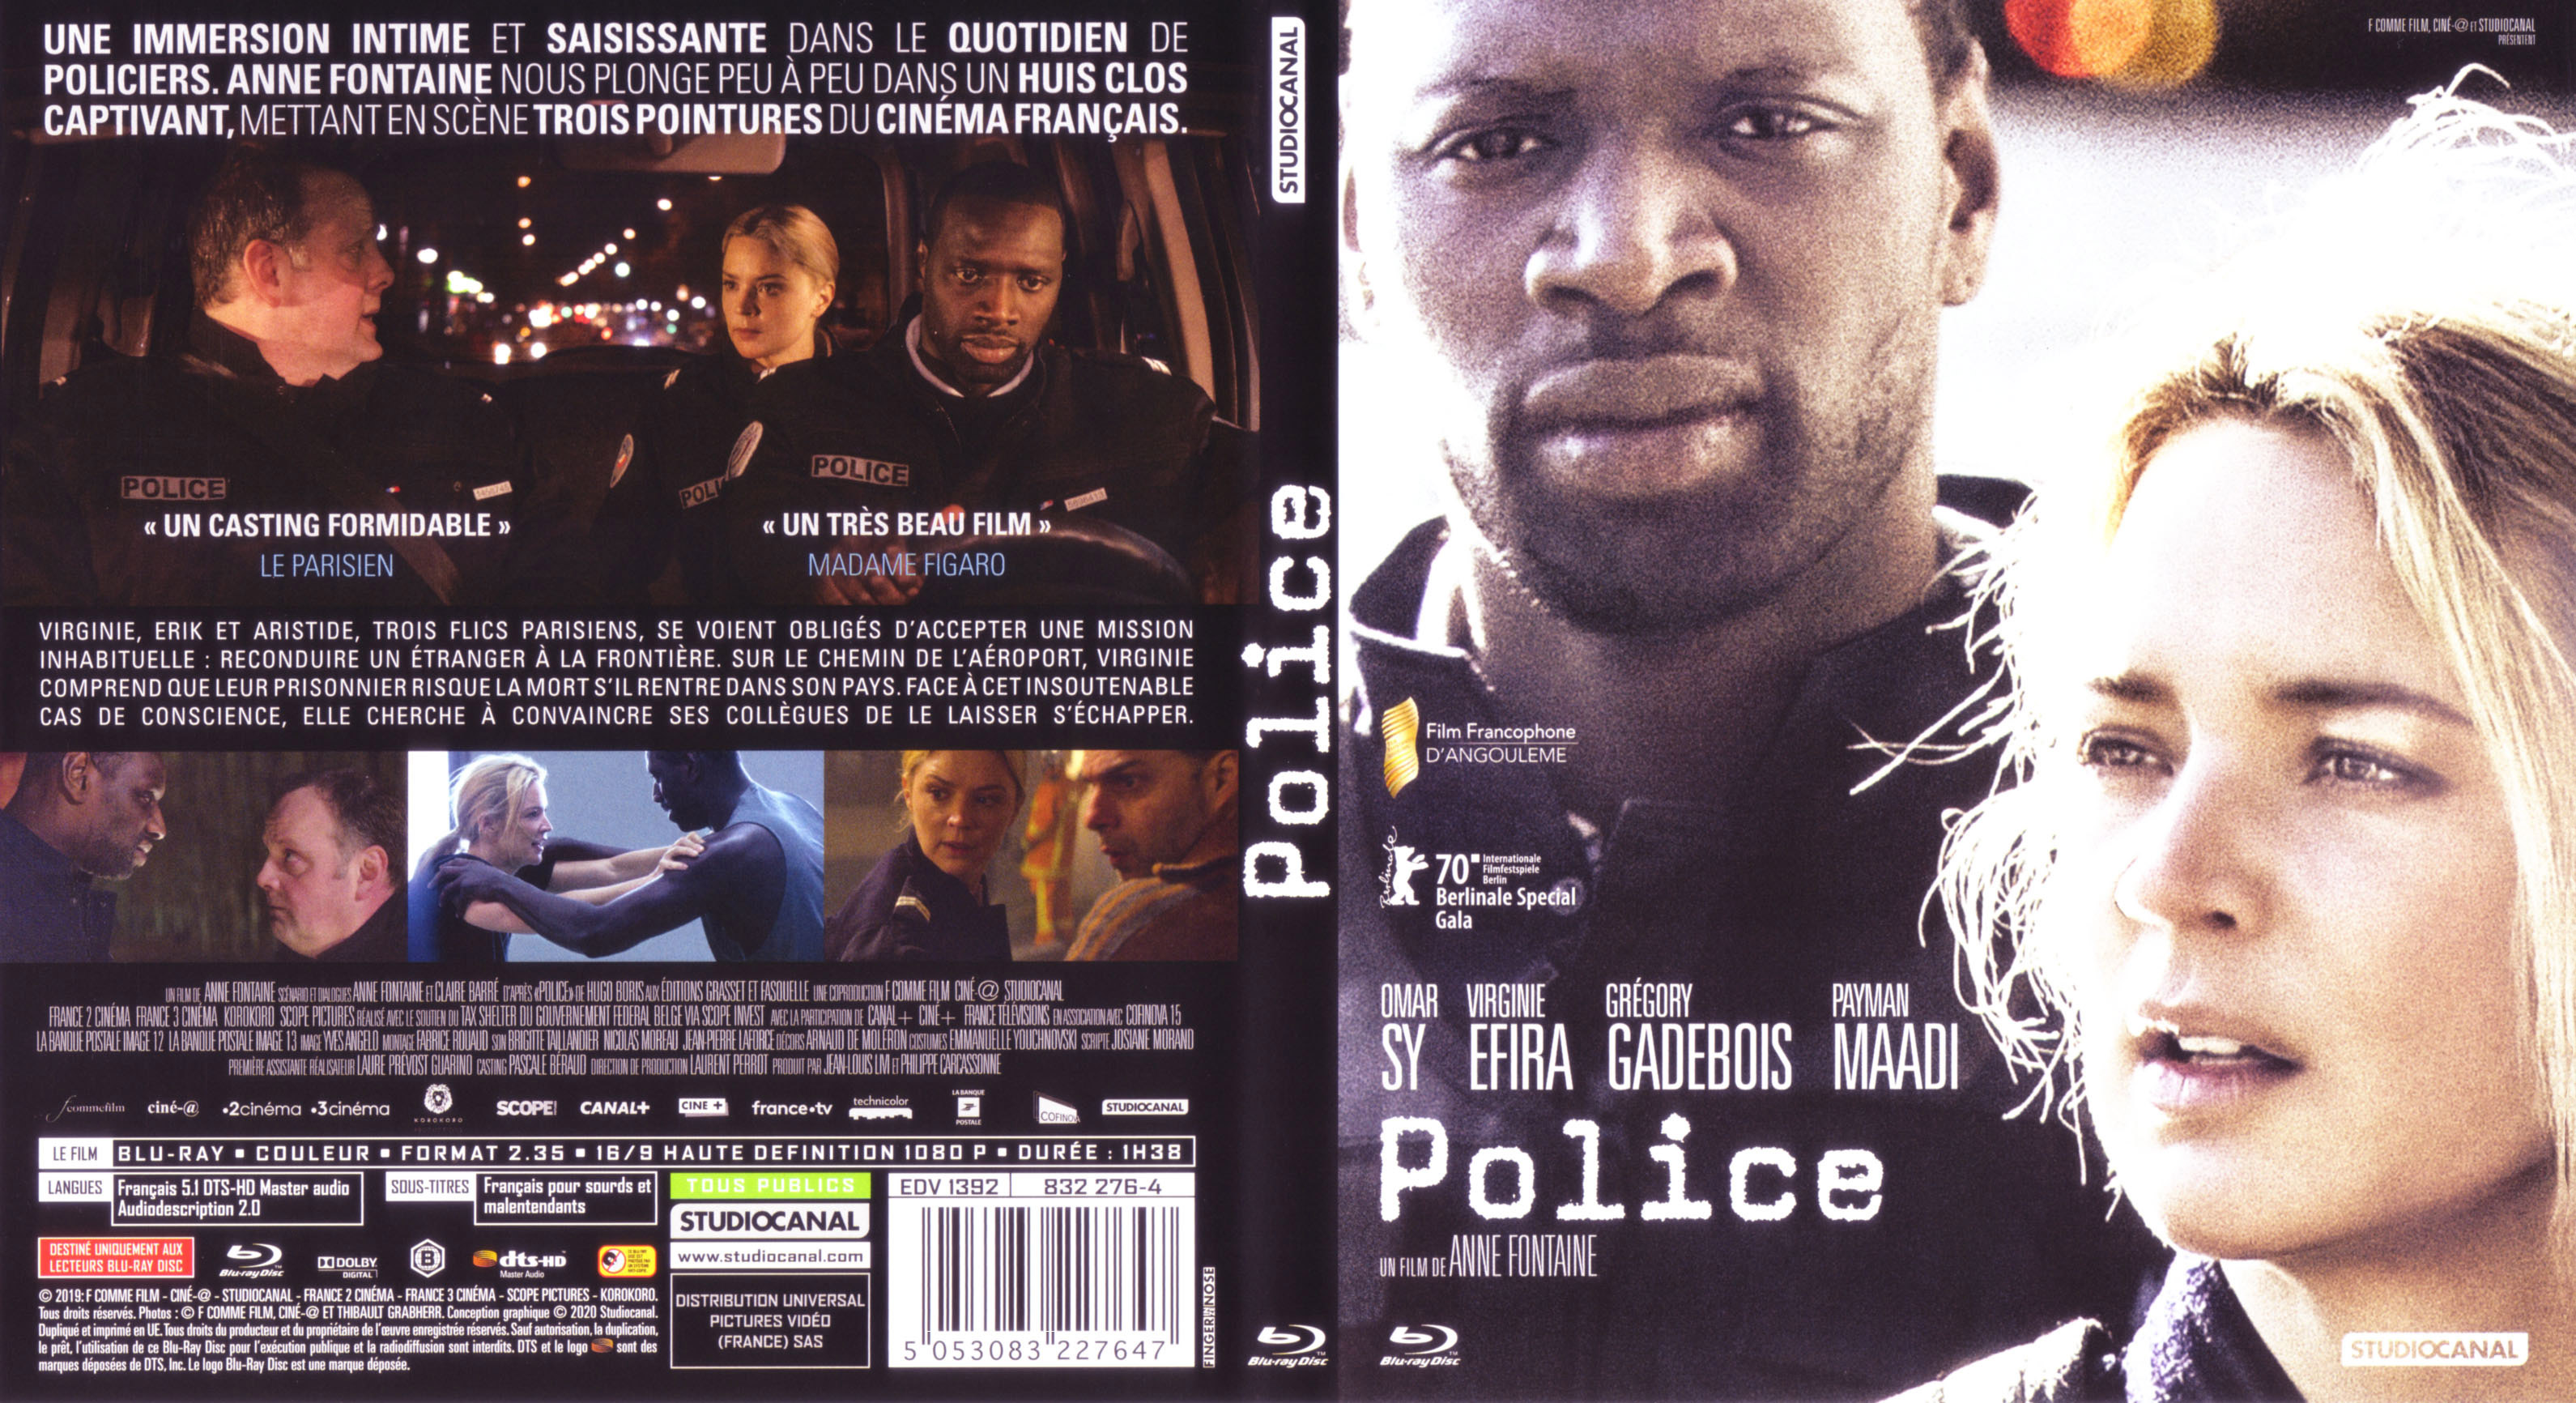 Jaquette DVD Police 2019 (BLU-RAY)